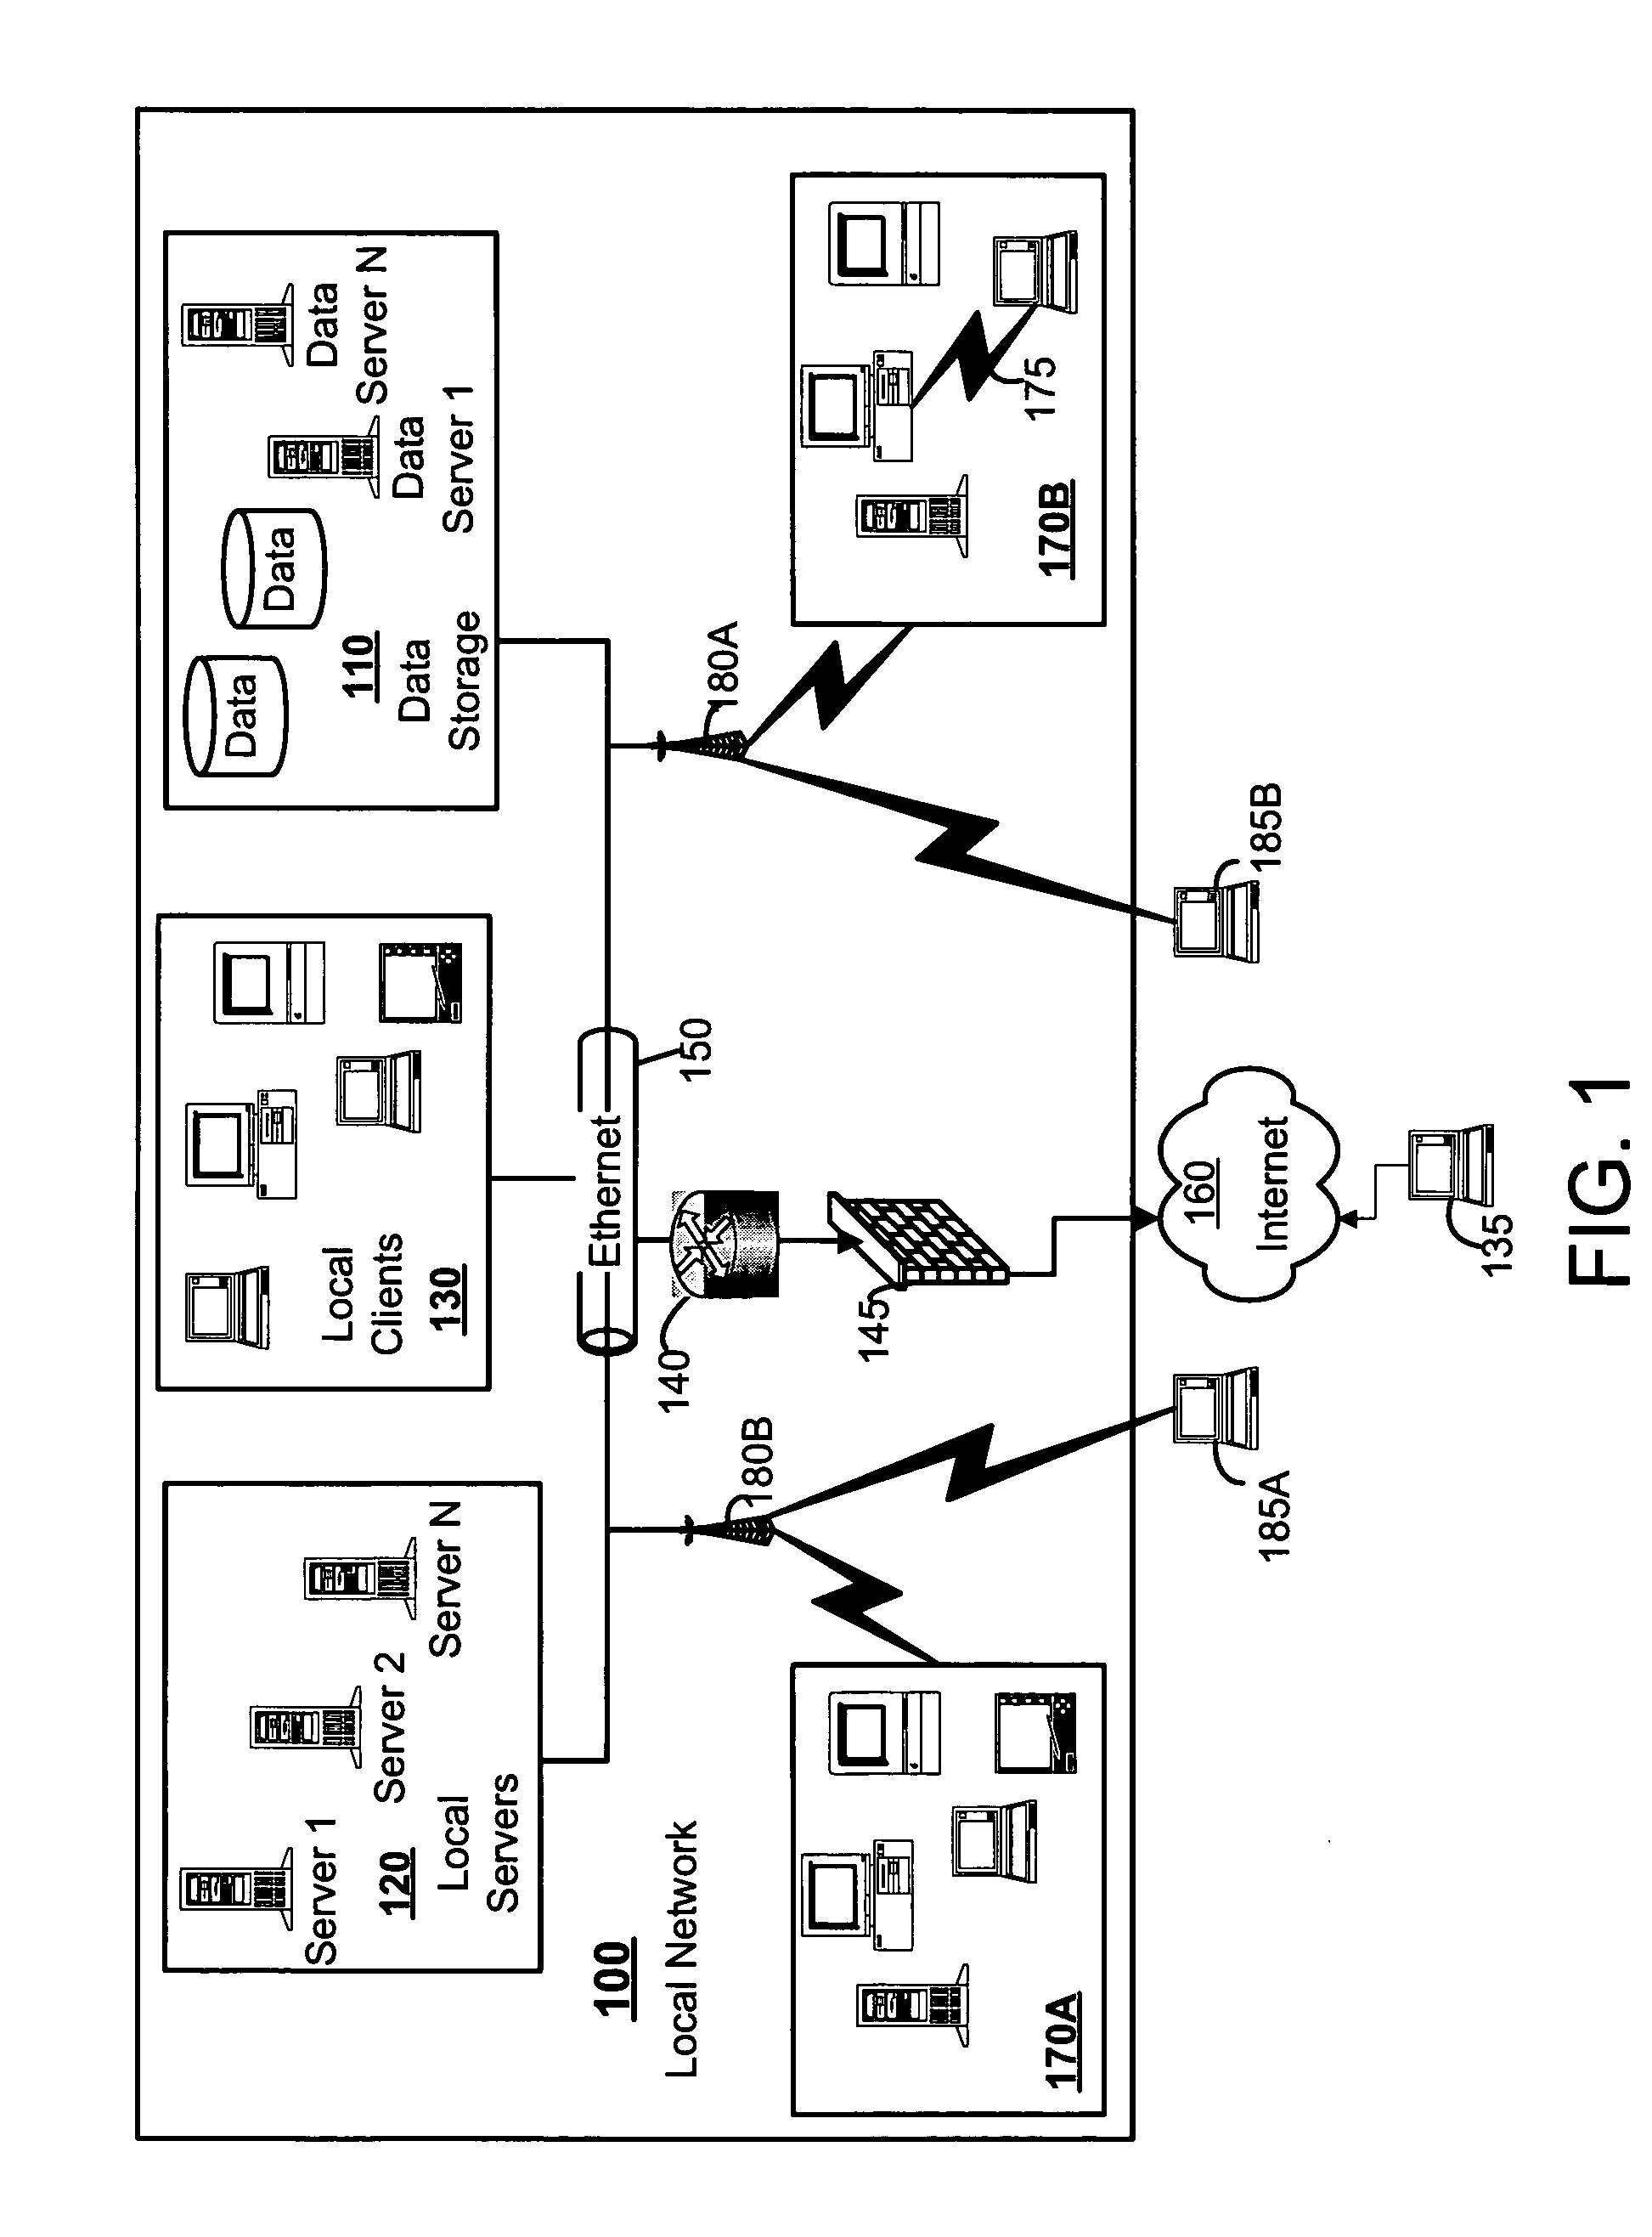 Systems and methods for wireless vulnerability analysis